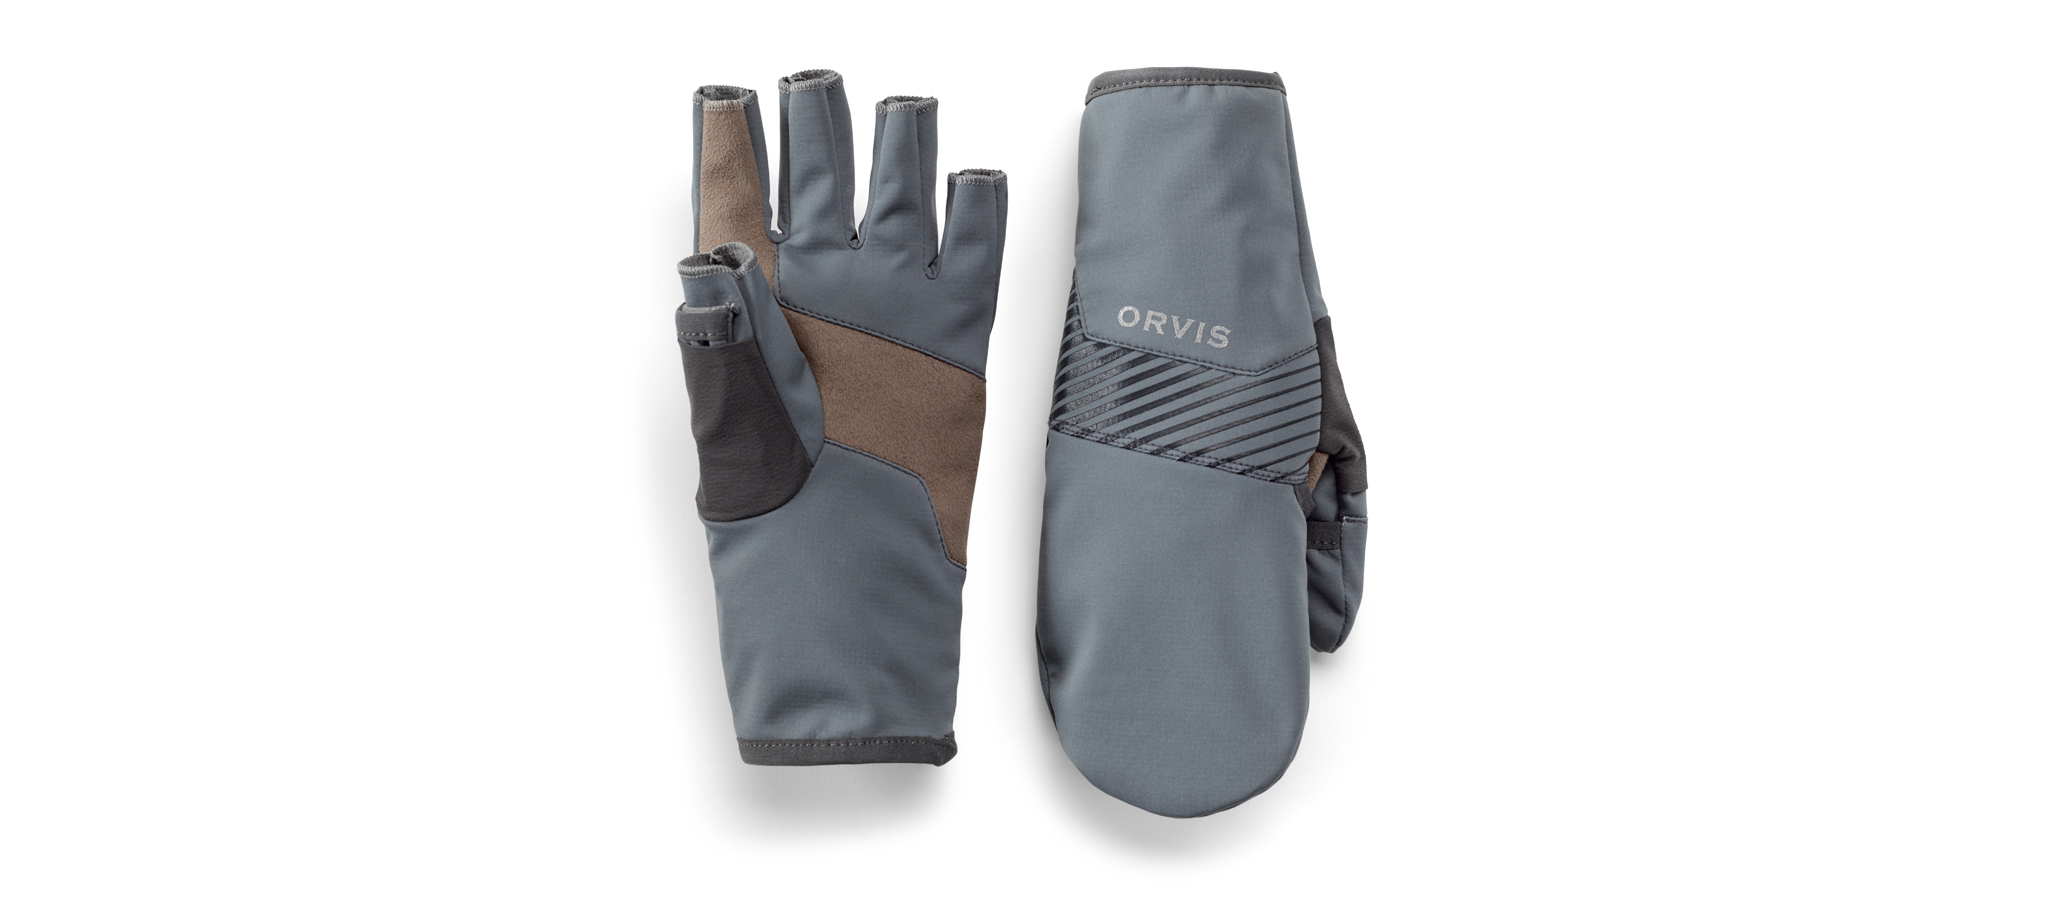 ORVIS-Softshell-Convertible-Mitts-Handschuhe